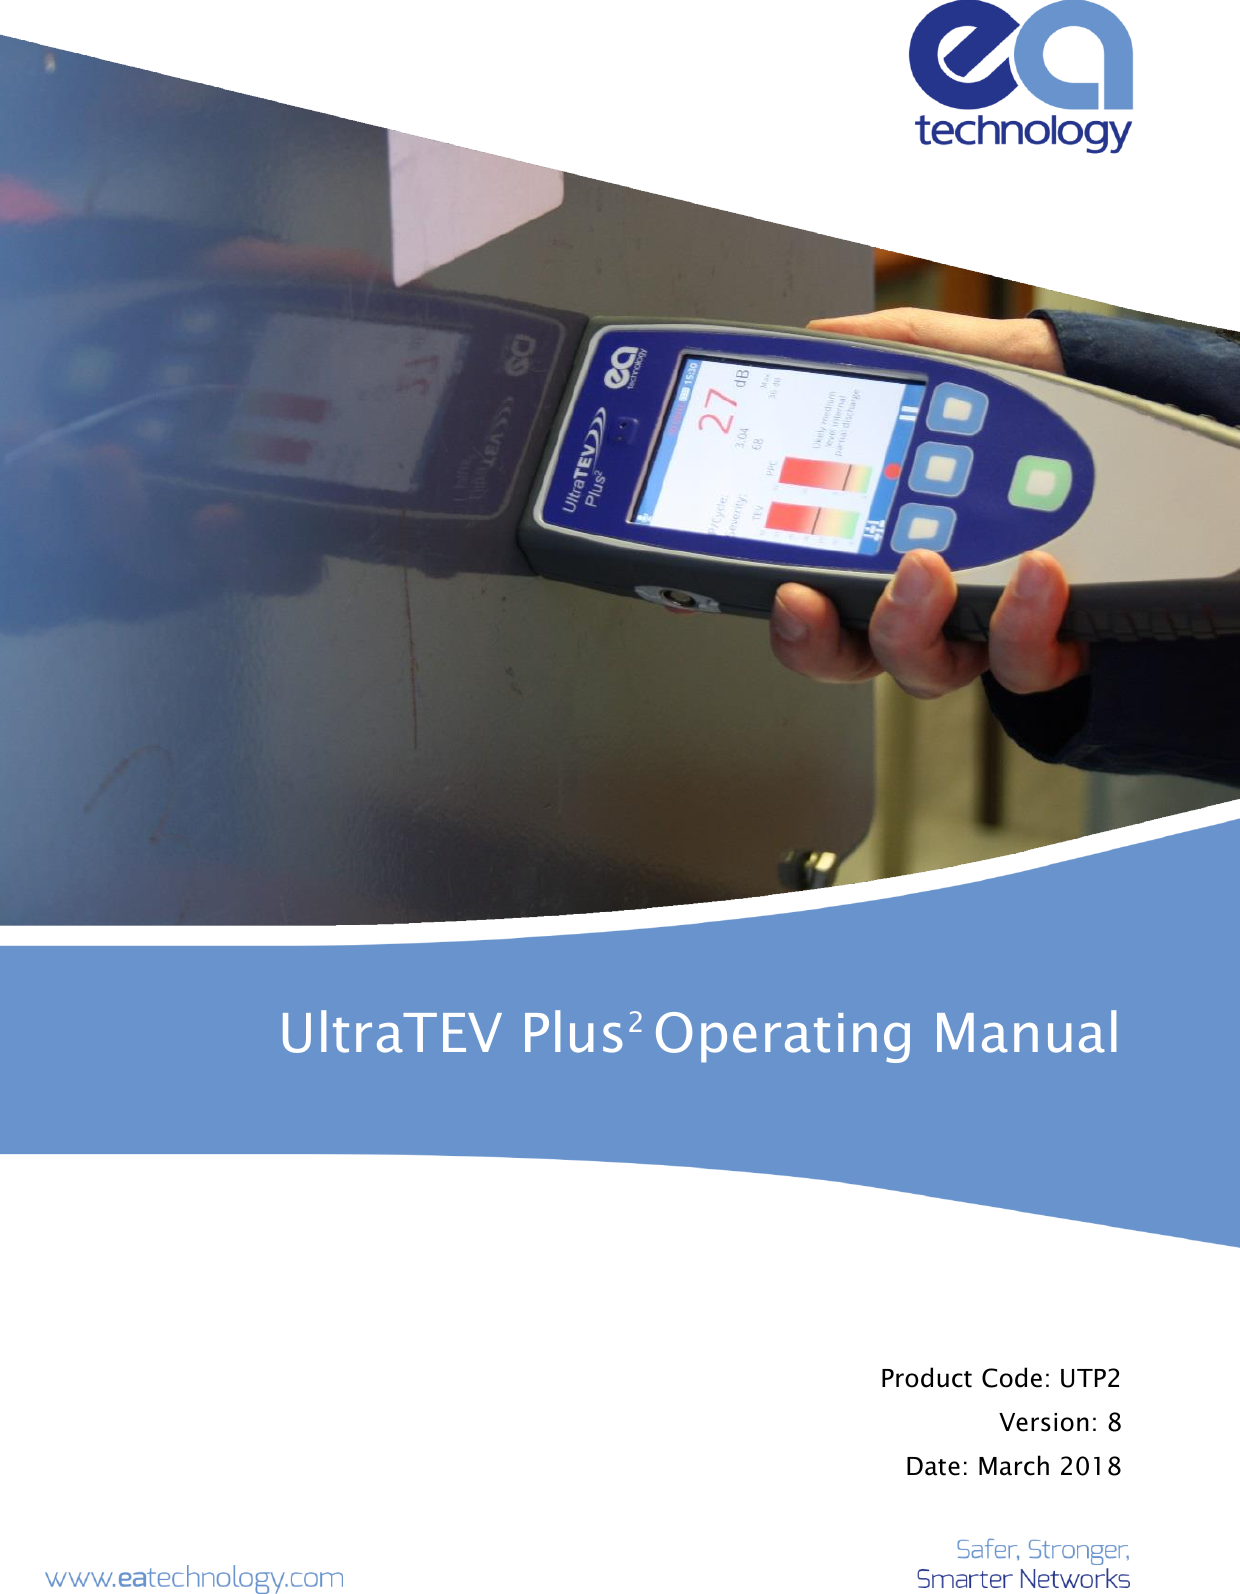     UltraTEV Plus2 Operating Manual     Product Code: UTP2 Version: 8 Date: March 2018  